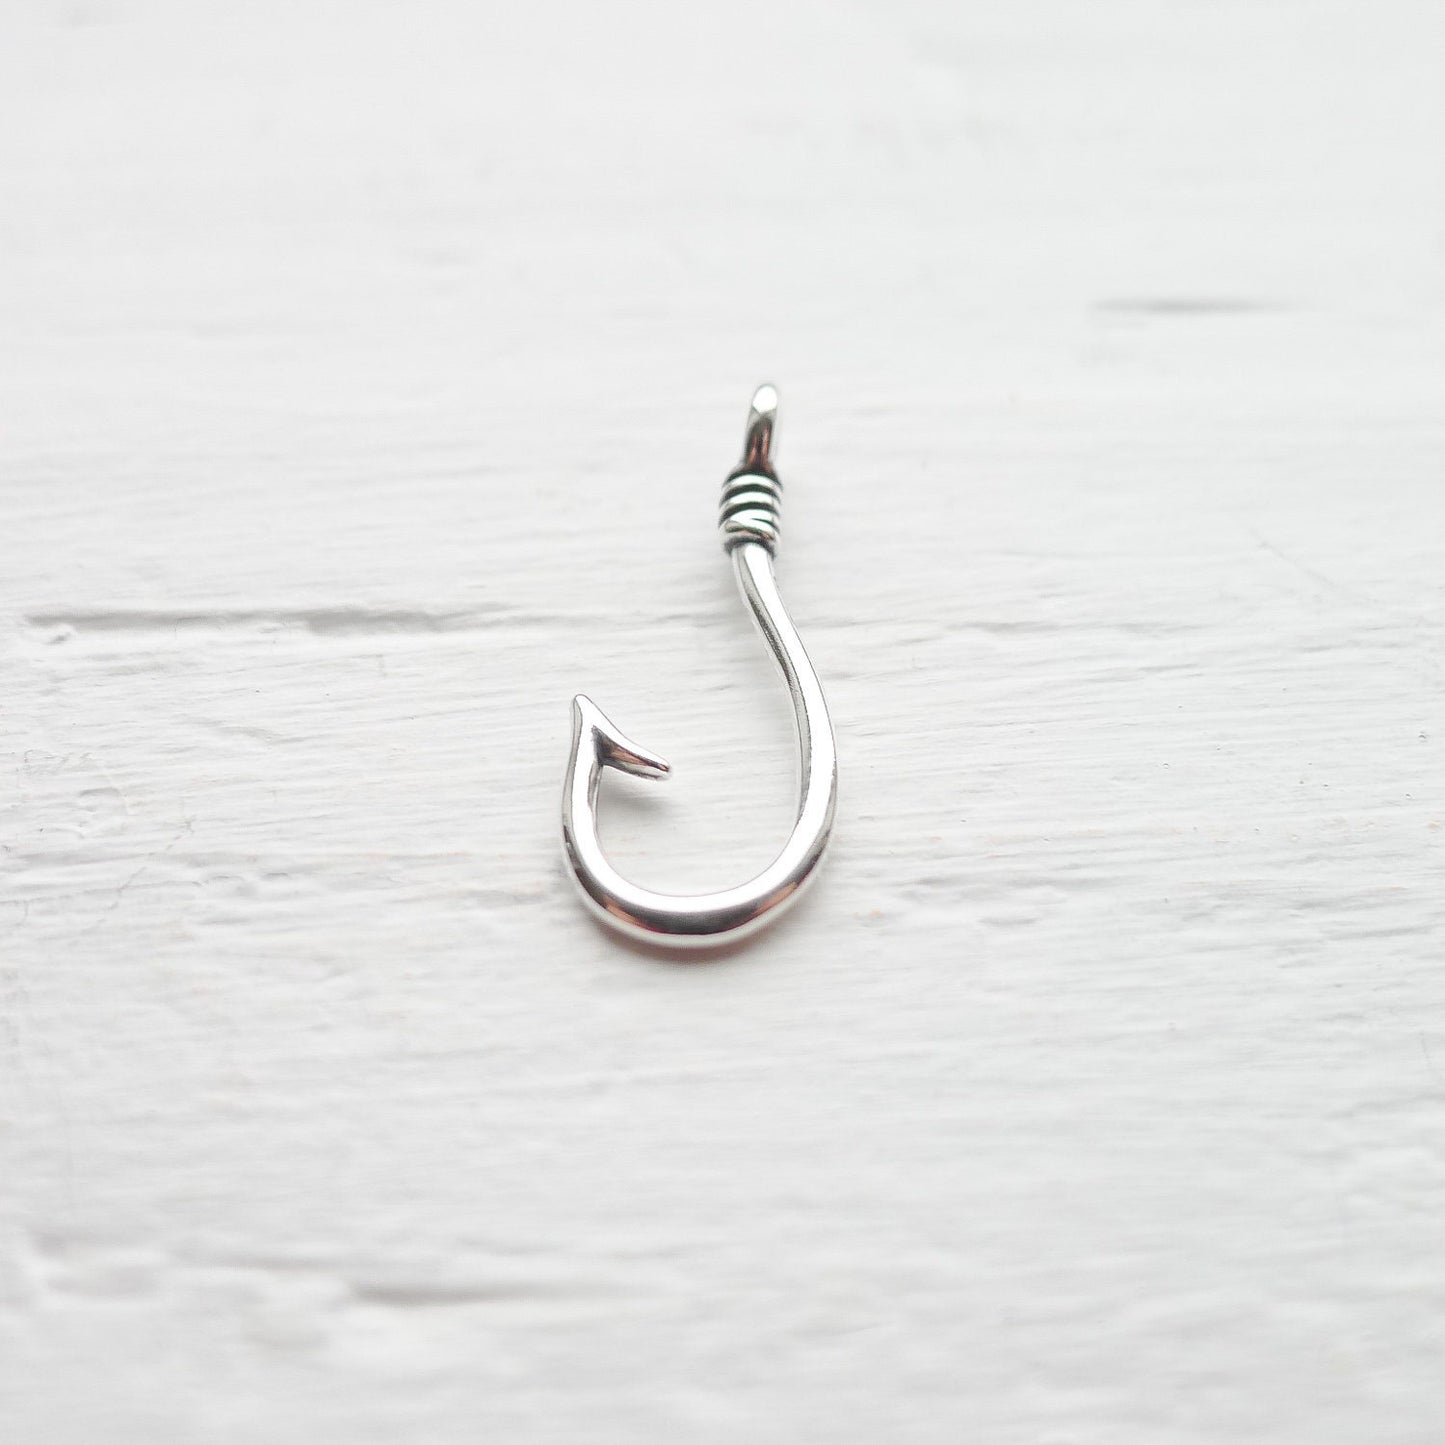 Fish Hook Charm Sterling Silver Fishing Component or Link for Jewelry Making